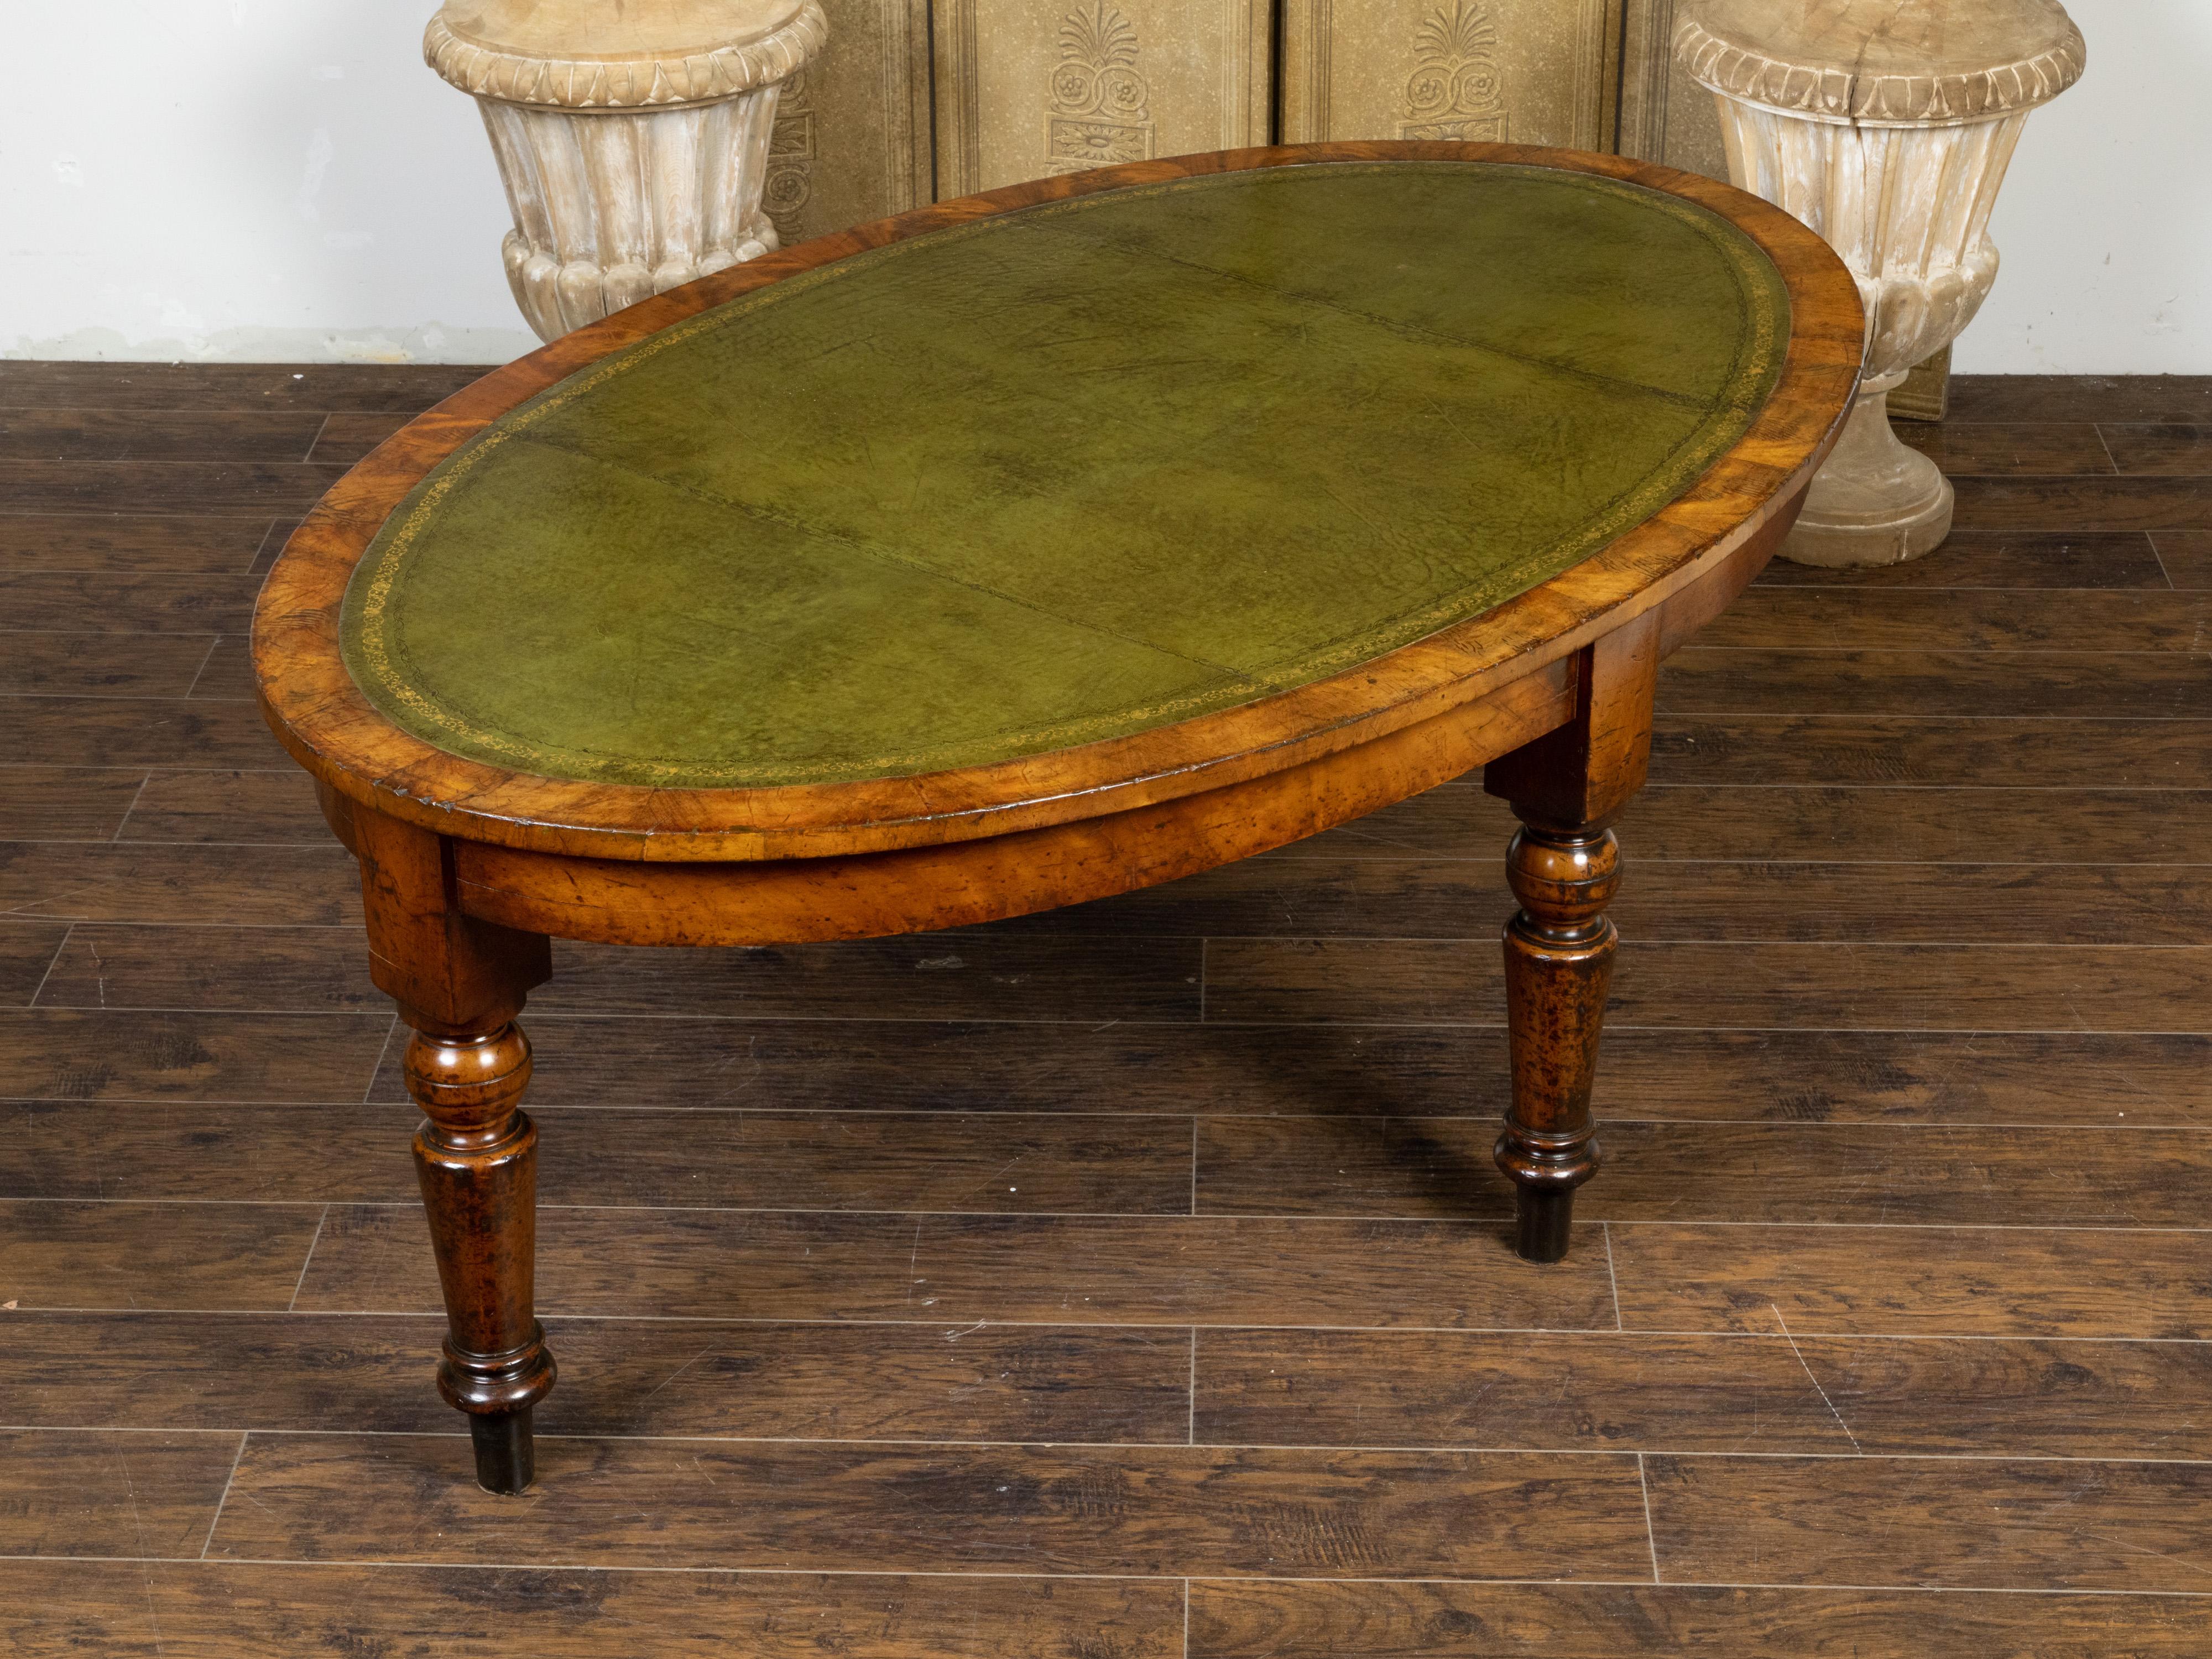 English 19th Century Mahogany Table with Green Leather Oval Top and Turned Legs In Good Condition For Sale In Atlanta, GA